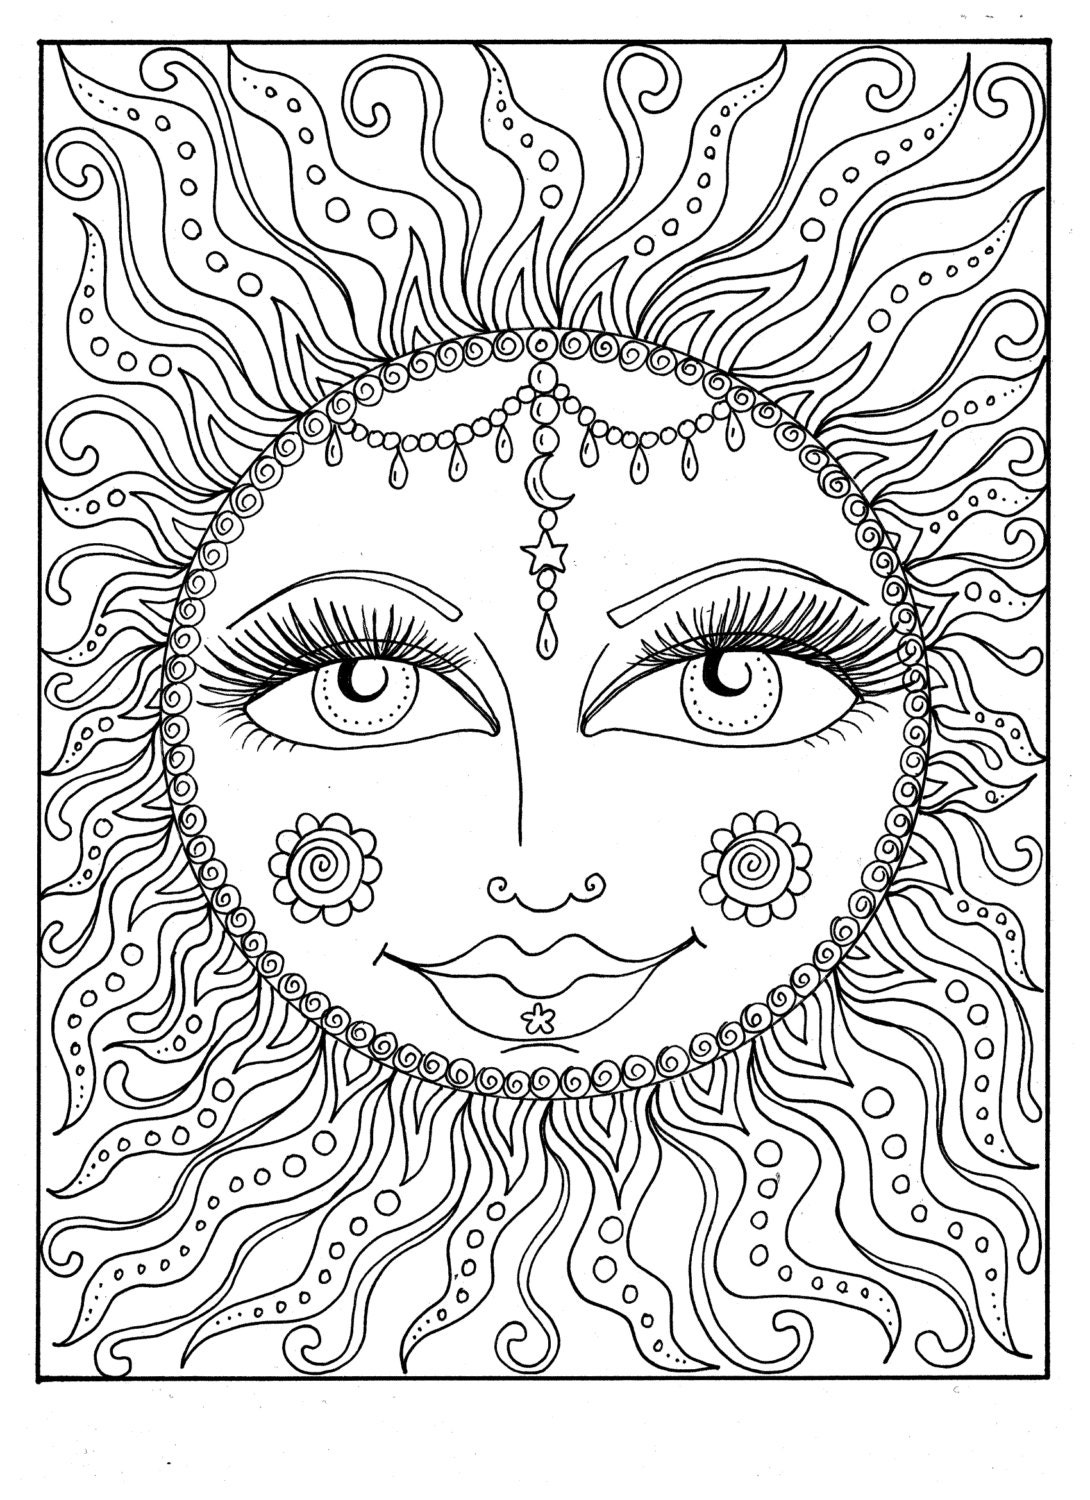 20-free-printable-summer-coloring-pages-for-adults-everfreecoloringcom